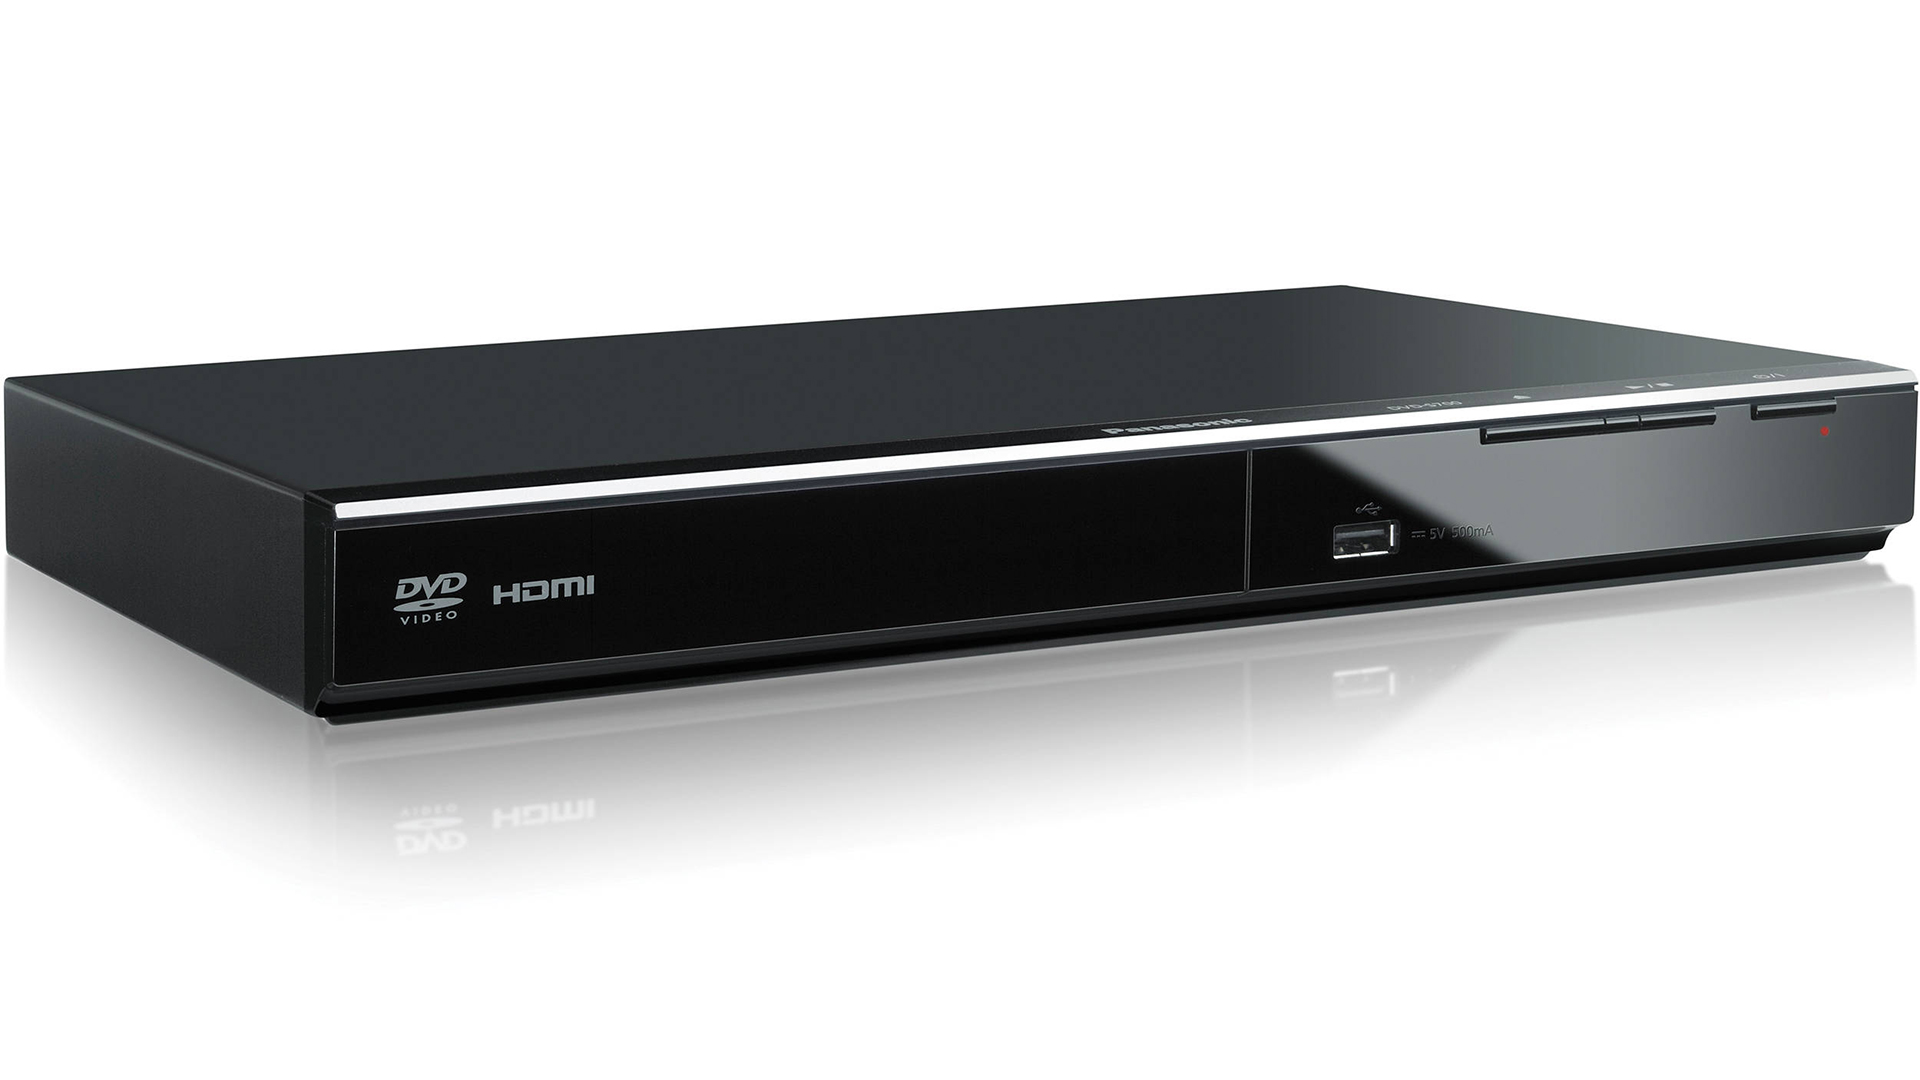 dvd player and recorder reviews